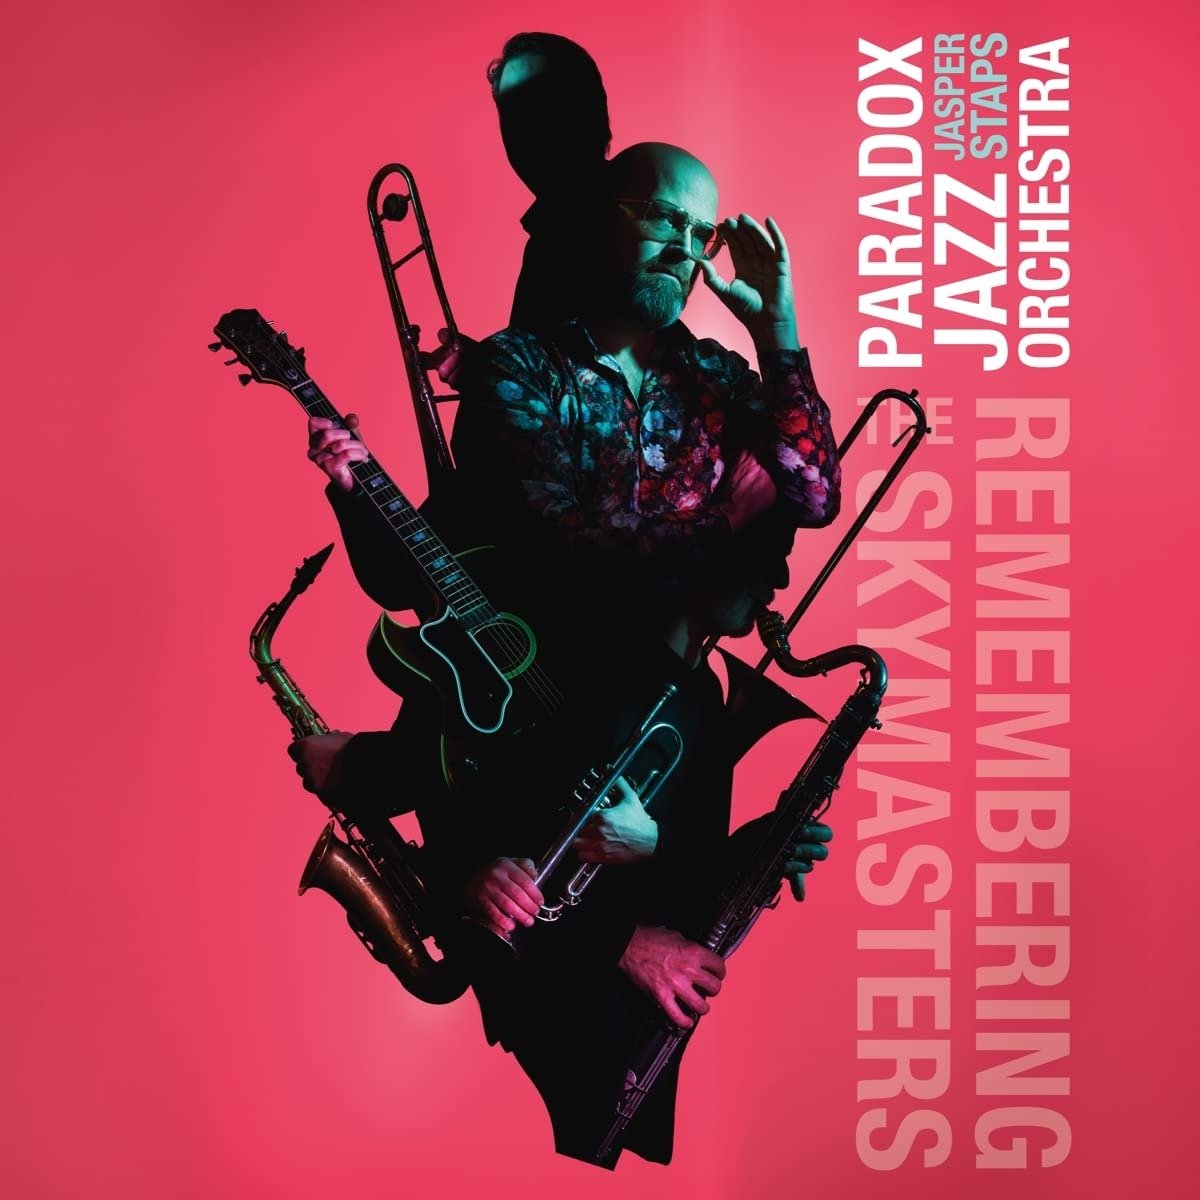 CD Shop - PARADOX JAZZ ORCHESTRA & REMEMBERING THE SKYMASTERS